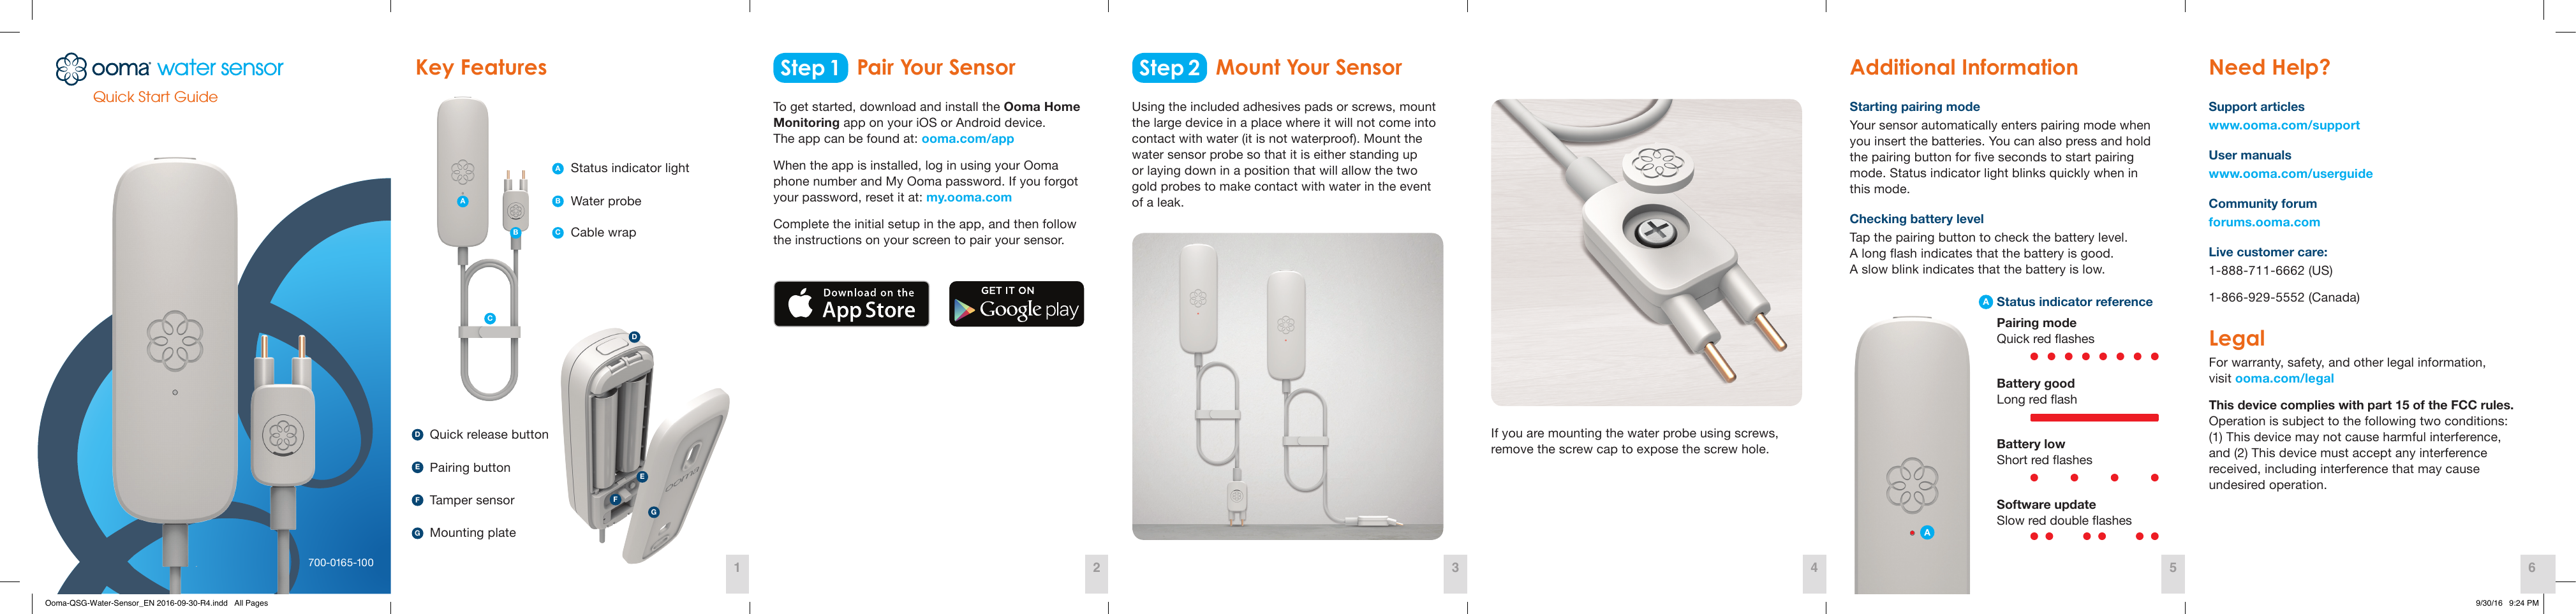 Quick Start Guide700-0165-100Step 1 Step 2Key Features  Additional Information  Need Help? Pair Your Sensor Mount Your SensorTo get started, download and install the Ooma Home Monitoring app on your iOS or Android device.  The app can be found at: ooma.com/app When the app is installed, log in using your Ooma  phone number and My Ooma password. If you forgot  your password, reset it at: my.ooma.com Complete the initial setup in the app, and then follow  the instructions on your screen to pair your sensor. Status indicator lightPairing buttonWater probeCable wrapTamper sensorMounting plateQuick release buttonStarting pairing modeYour sensor automatically enters pairing mode when you insert the batteries. You can also press and hold the pairing button for ve seconds to start pairing mode. Status indicator light blinks quickly when in this mode. Checking battery levelTap the pairing button to check the battery level.  A long ash indicates that the battery is good.  A slow blink indicates that the battery is low.Using the included adhesives pads or screws, mount the large device in a place where it will not come into contact with water (it is not waterproof). Mount the water sensor probe so that it is either standing up  or laying down in a position that will allow the two  gold probes to make contact with water in the event  of a leak. If you are mounting the water probe using screws, remove the screw cap to expose the screw hole. Support articles www.ooma.com/support User manualswww.ooma.com/userguide Community forum forums.ooma.com Live customer care: 1-888-711-6662 (US) 1-866-929-5552 (Canada) Legal For warranty, safety, and other legal information,  visit ooma.com/legal This device complies with part 15 of the FCC rules. Operation is subject to the following two conditions:  (1) This device may not cause harmful interference,  and (2) This device must accept any interference  received, including interference that may cause  undesired operation. 1 42 53 6ADBCEFGADFEGACBStatus indicator referencePairing mode Quick red ashesBattery good Long red ashBattery low Short red ashesSoftware update Slow red double ashesAOoma-QSG-Water-Sensor_EN 2016-09-30-R4.indd   All Pages 9/30/16   9:24 PM